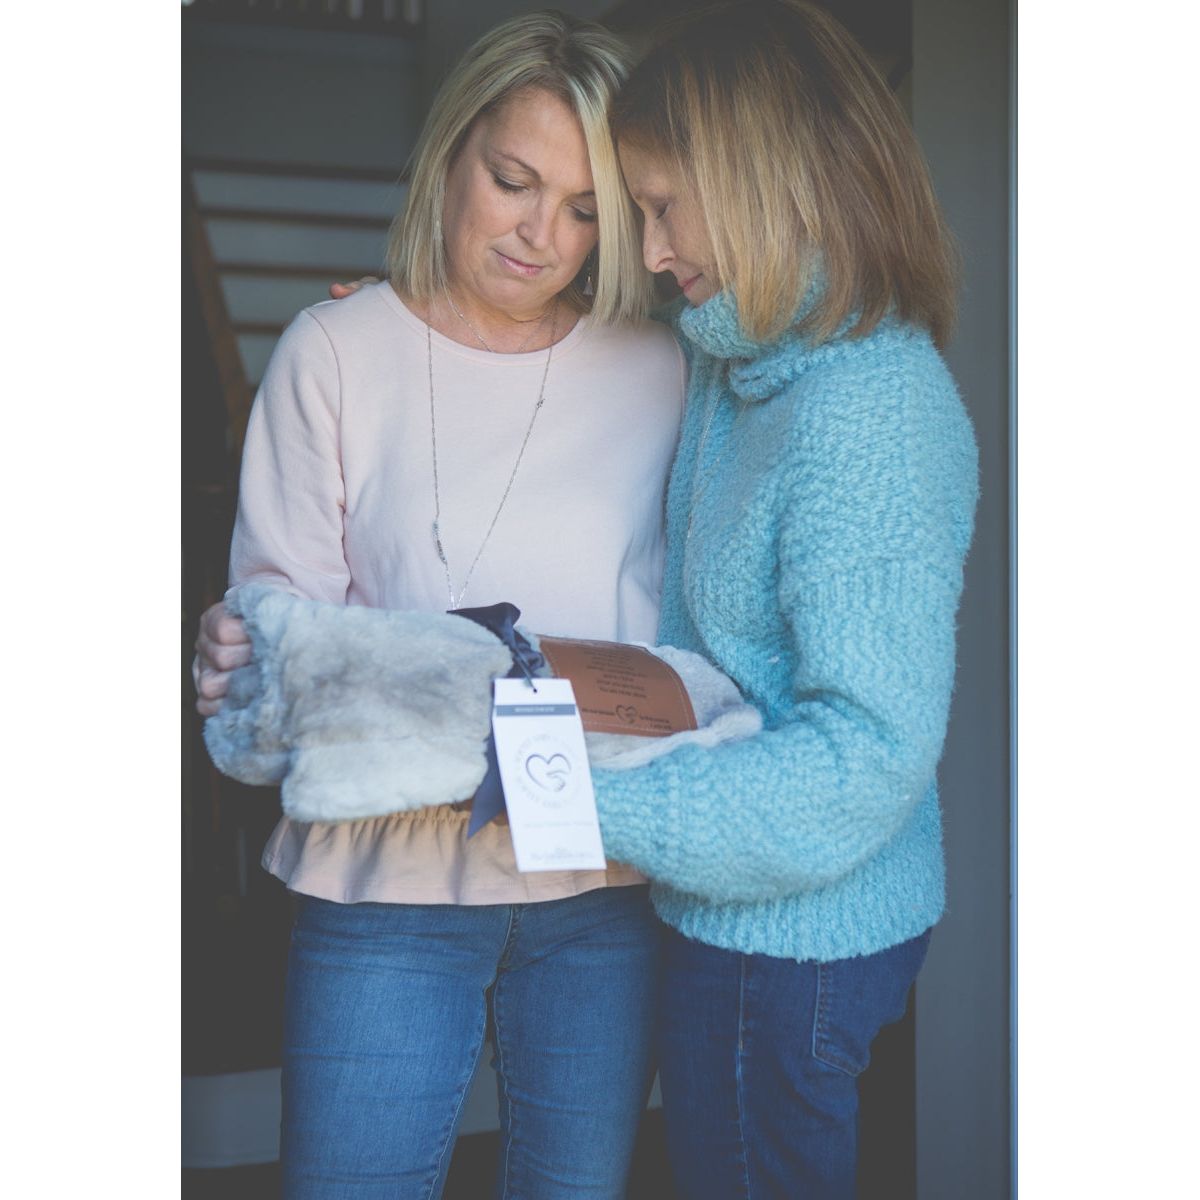 Two women exchanging the sympathy blanket gift.